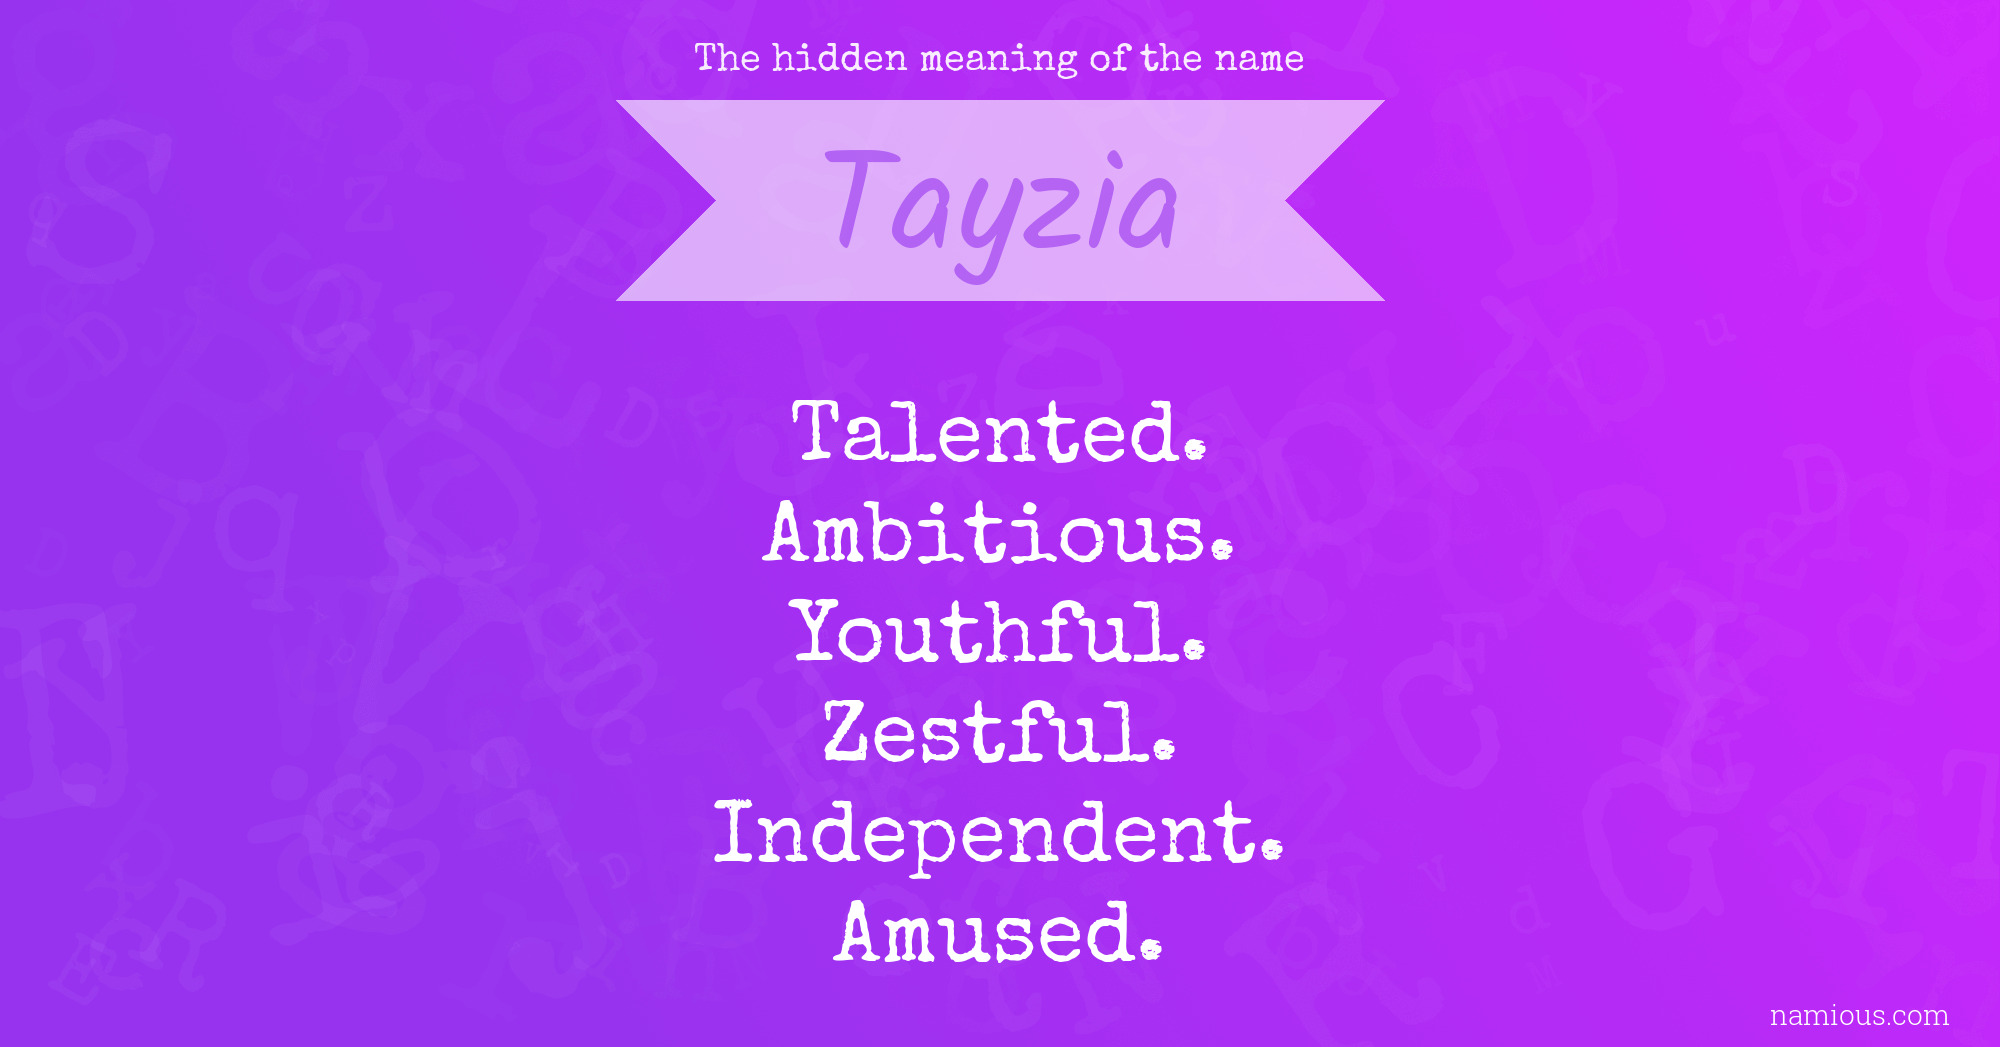 The hidden meaning of the name Tayzia